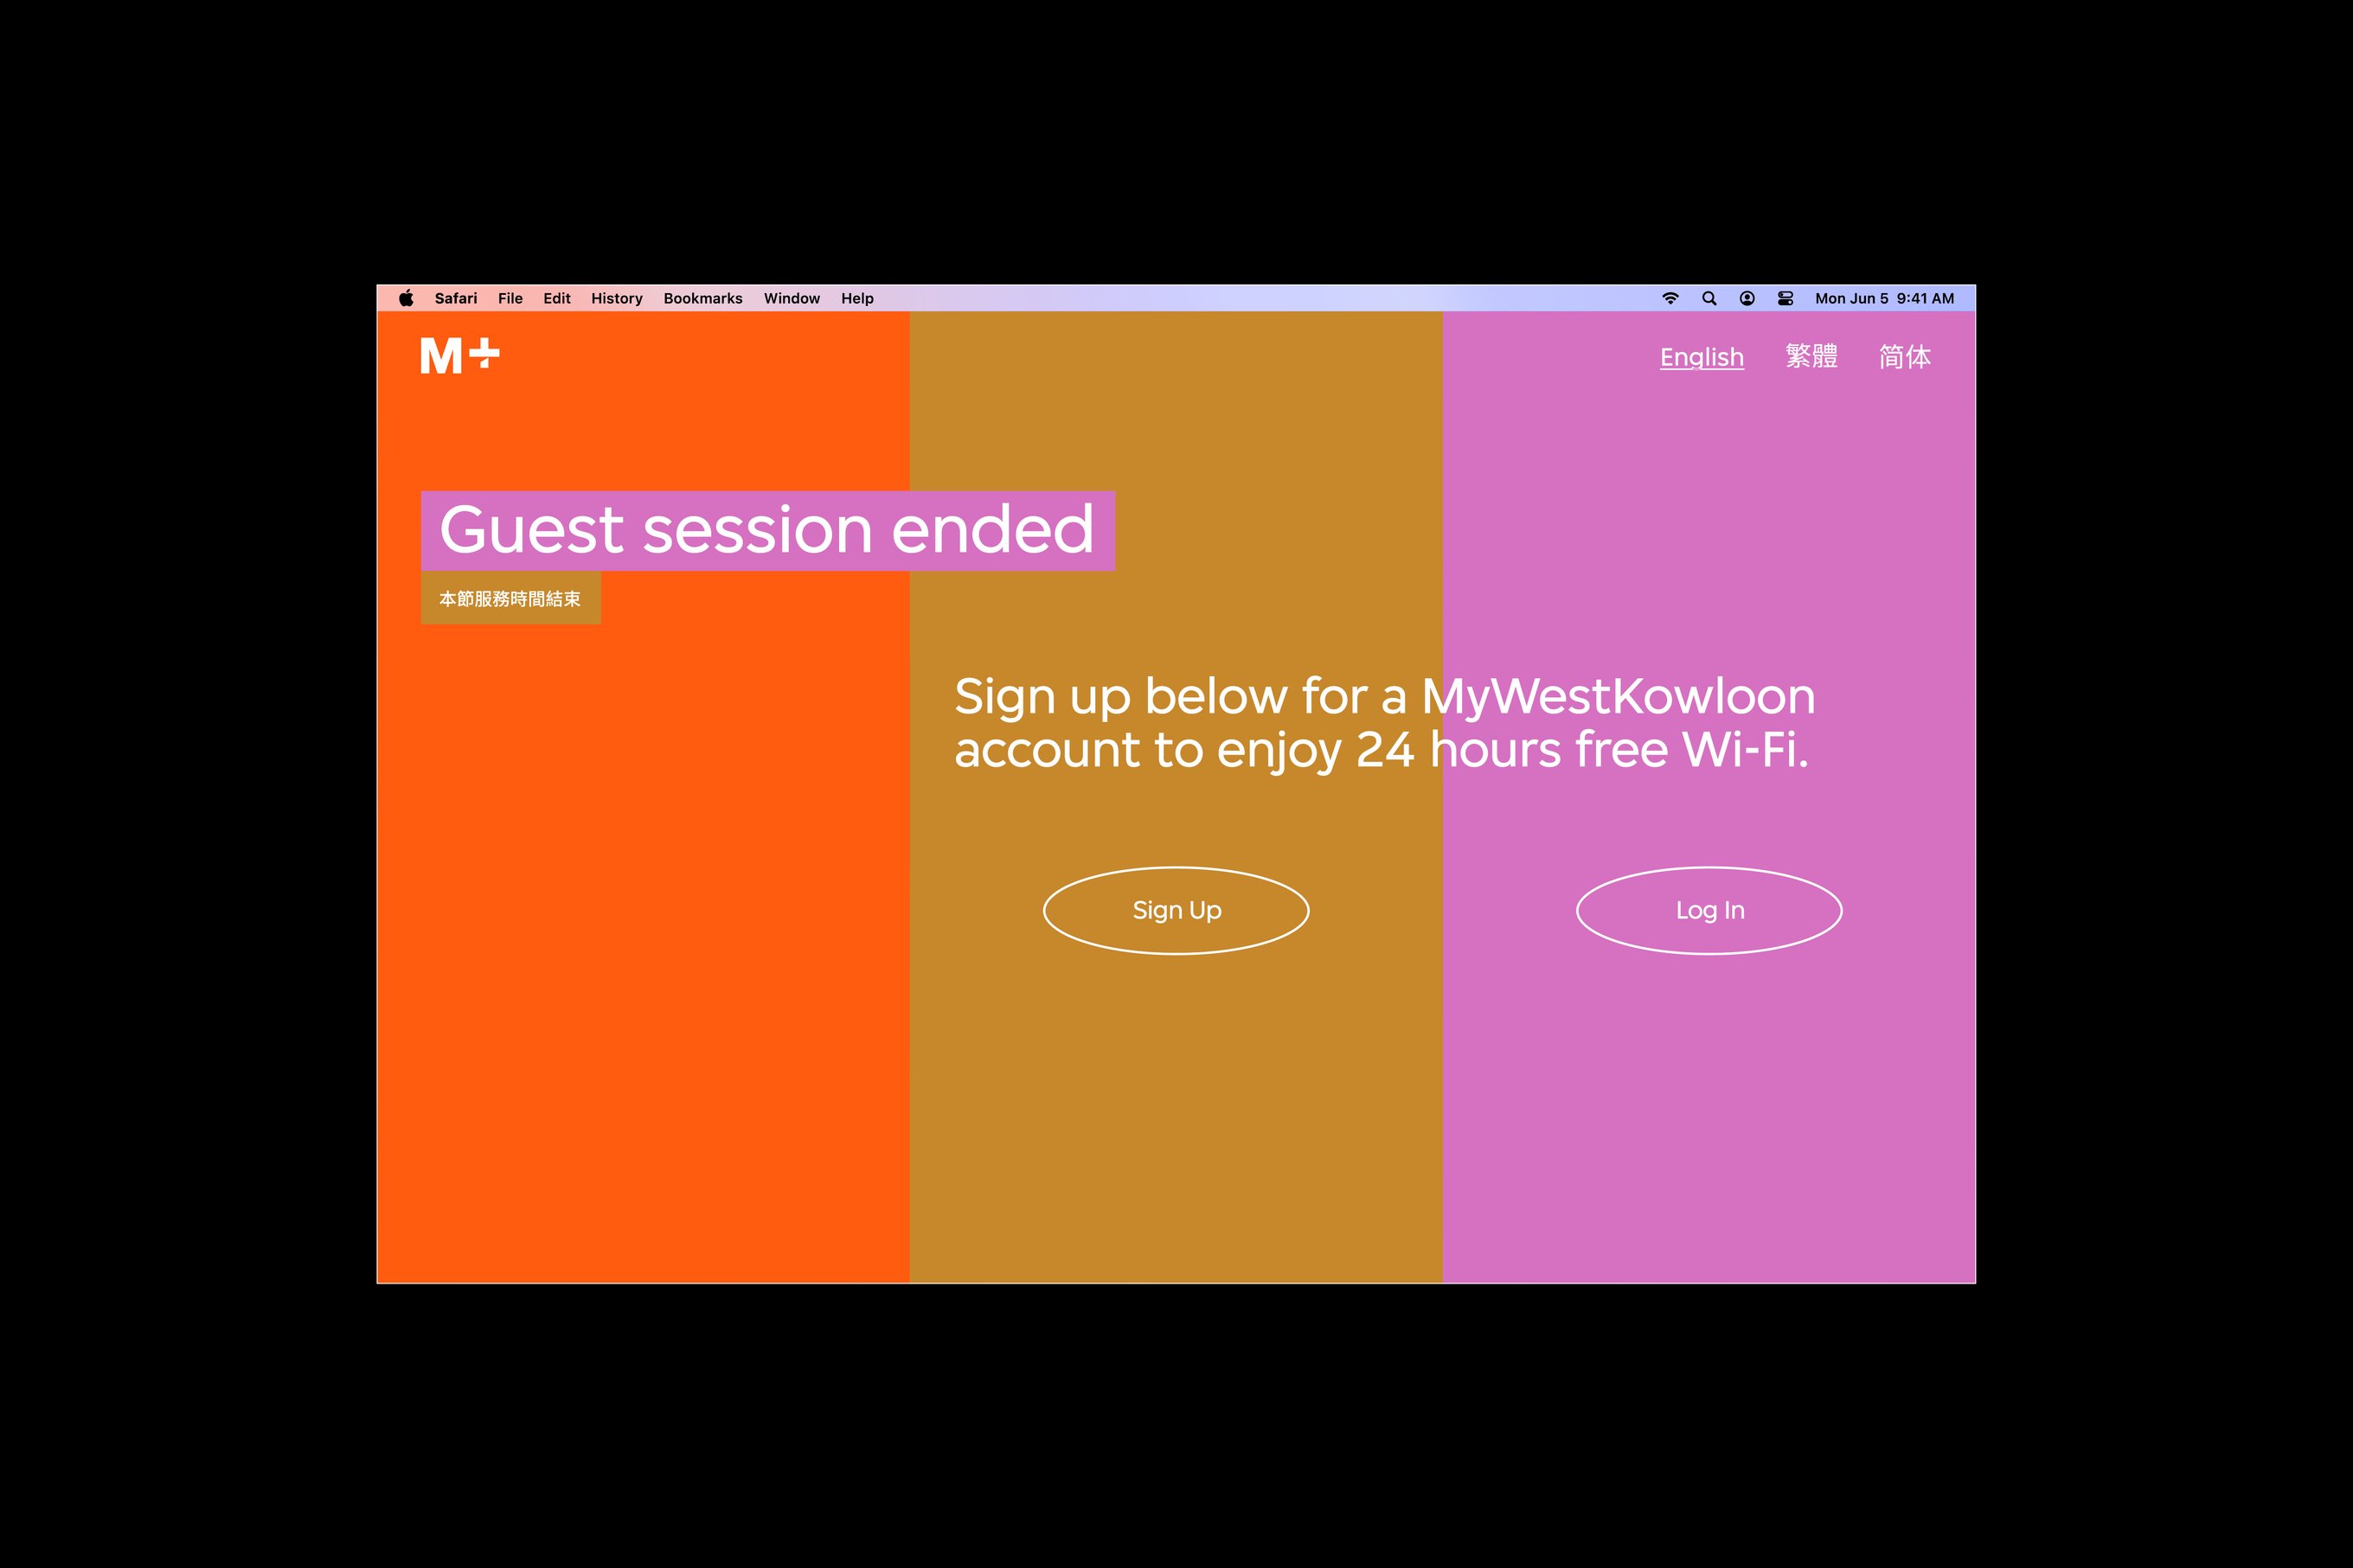 An interface of the M+ Wi-Fi guest session ended page.